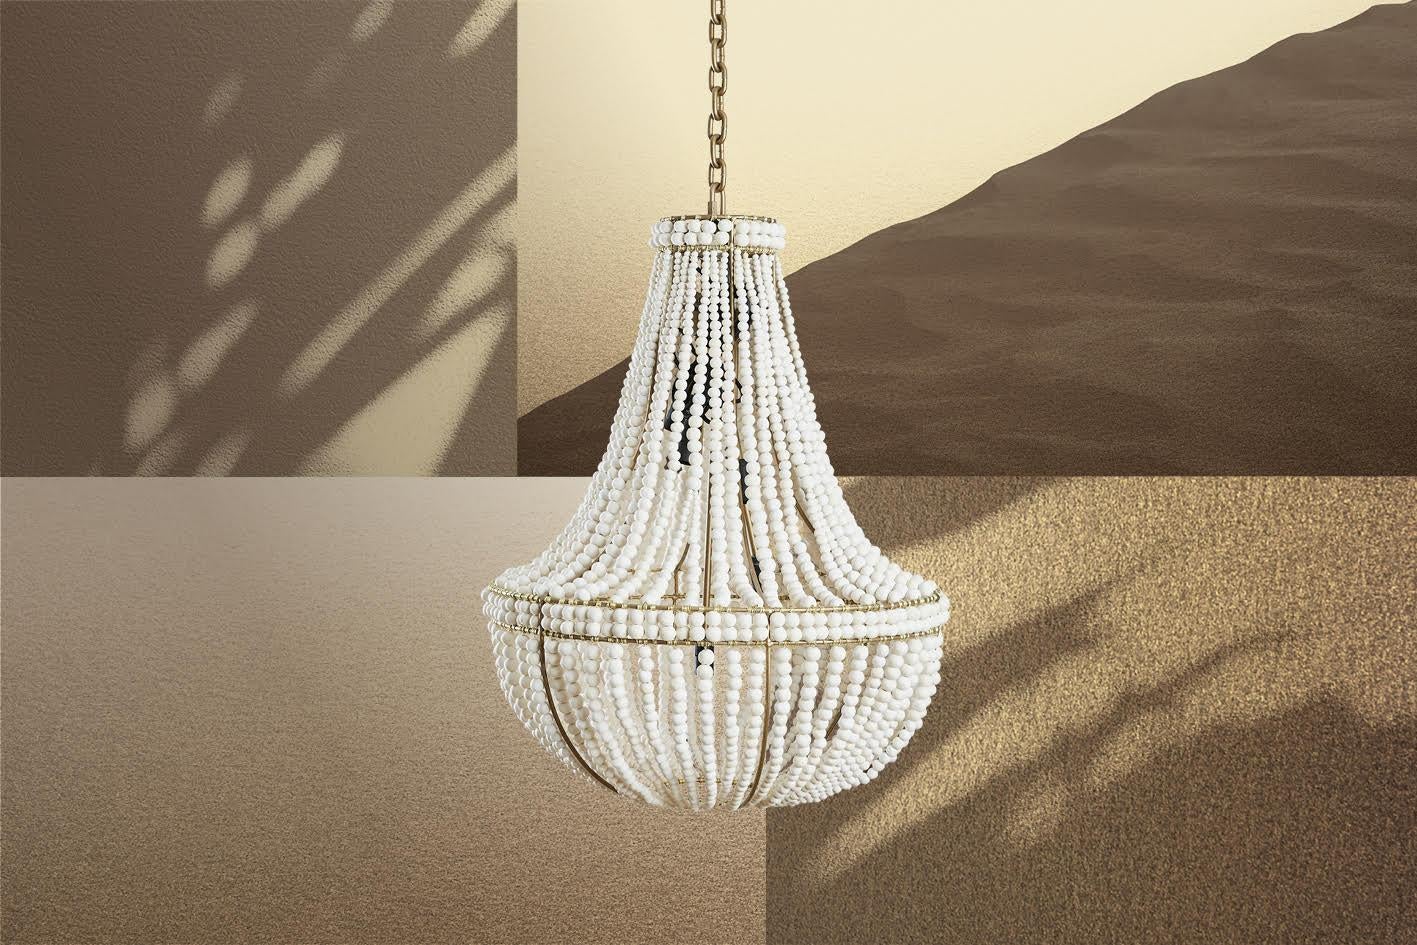 The klaylife sash is a handmade, modern chandelier with a Classic style with the added detail of a top band and belly band that accentuates the line and length of the clay beaded chandelier. The sash is one of our most popular chandeliers and is a